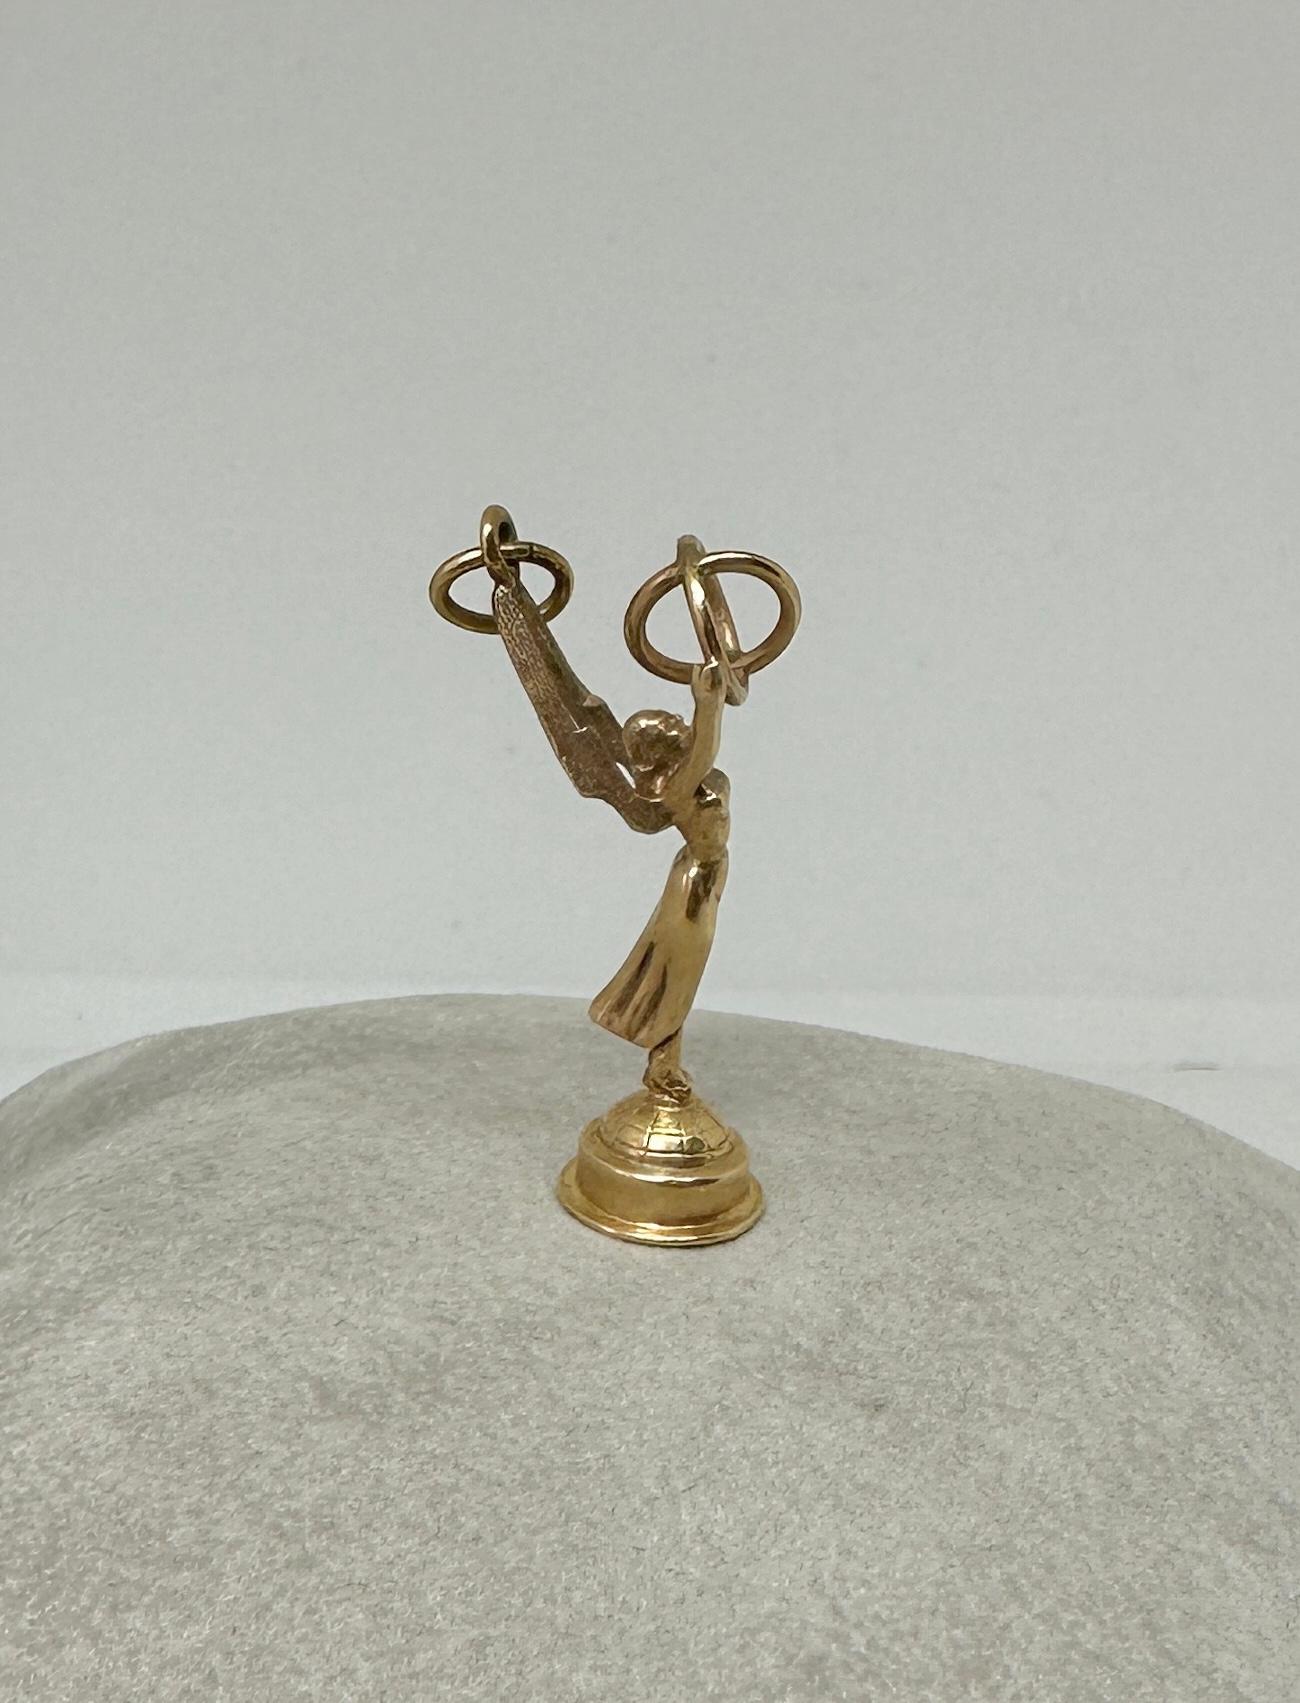 Rare Emmy Award Pendant Norman Lloyd Estate Hollywood Legend 14 Karat Gold In Excellent Condition For Sale In New York, NY